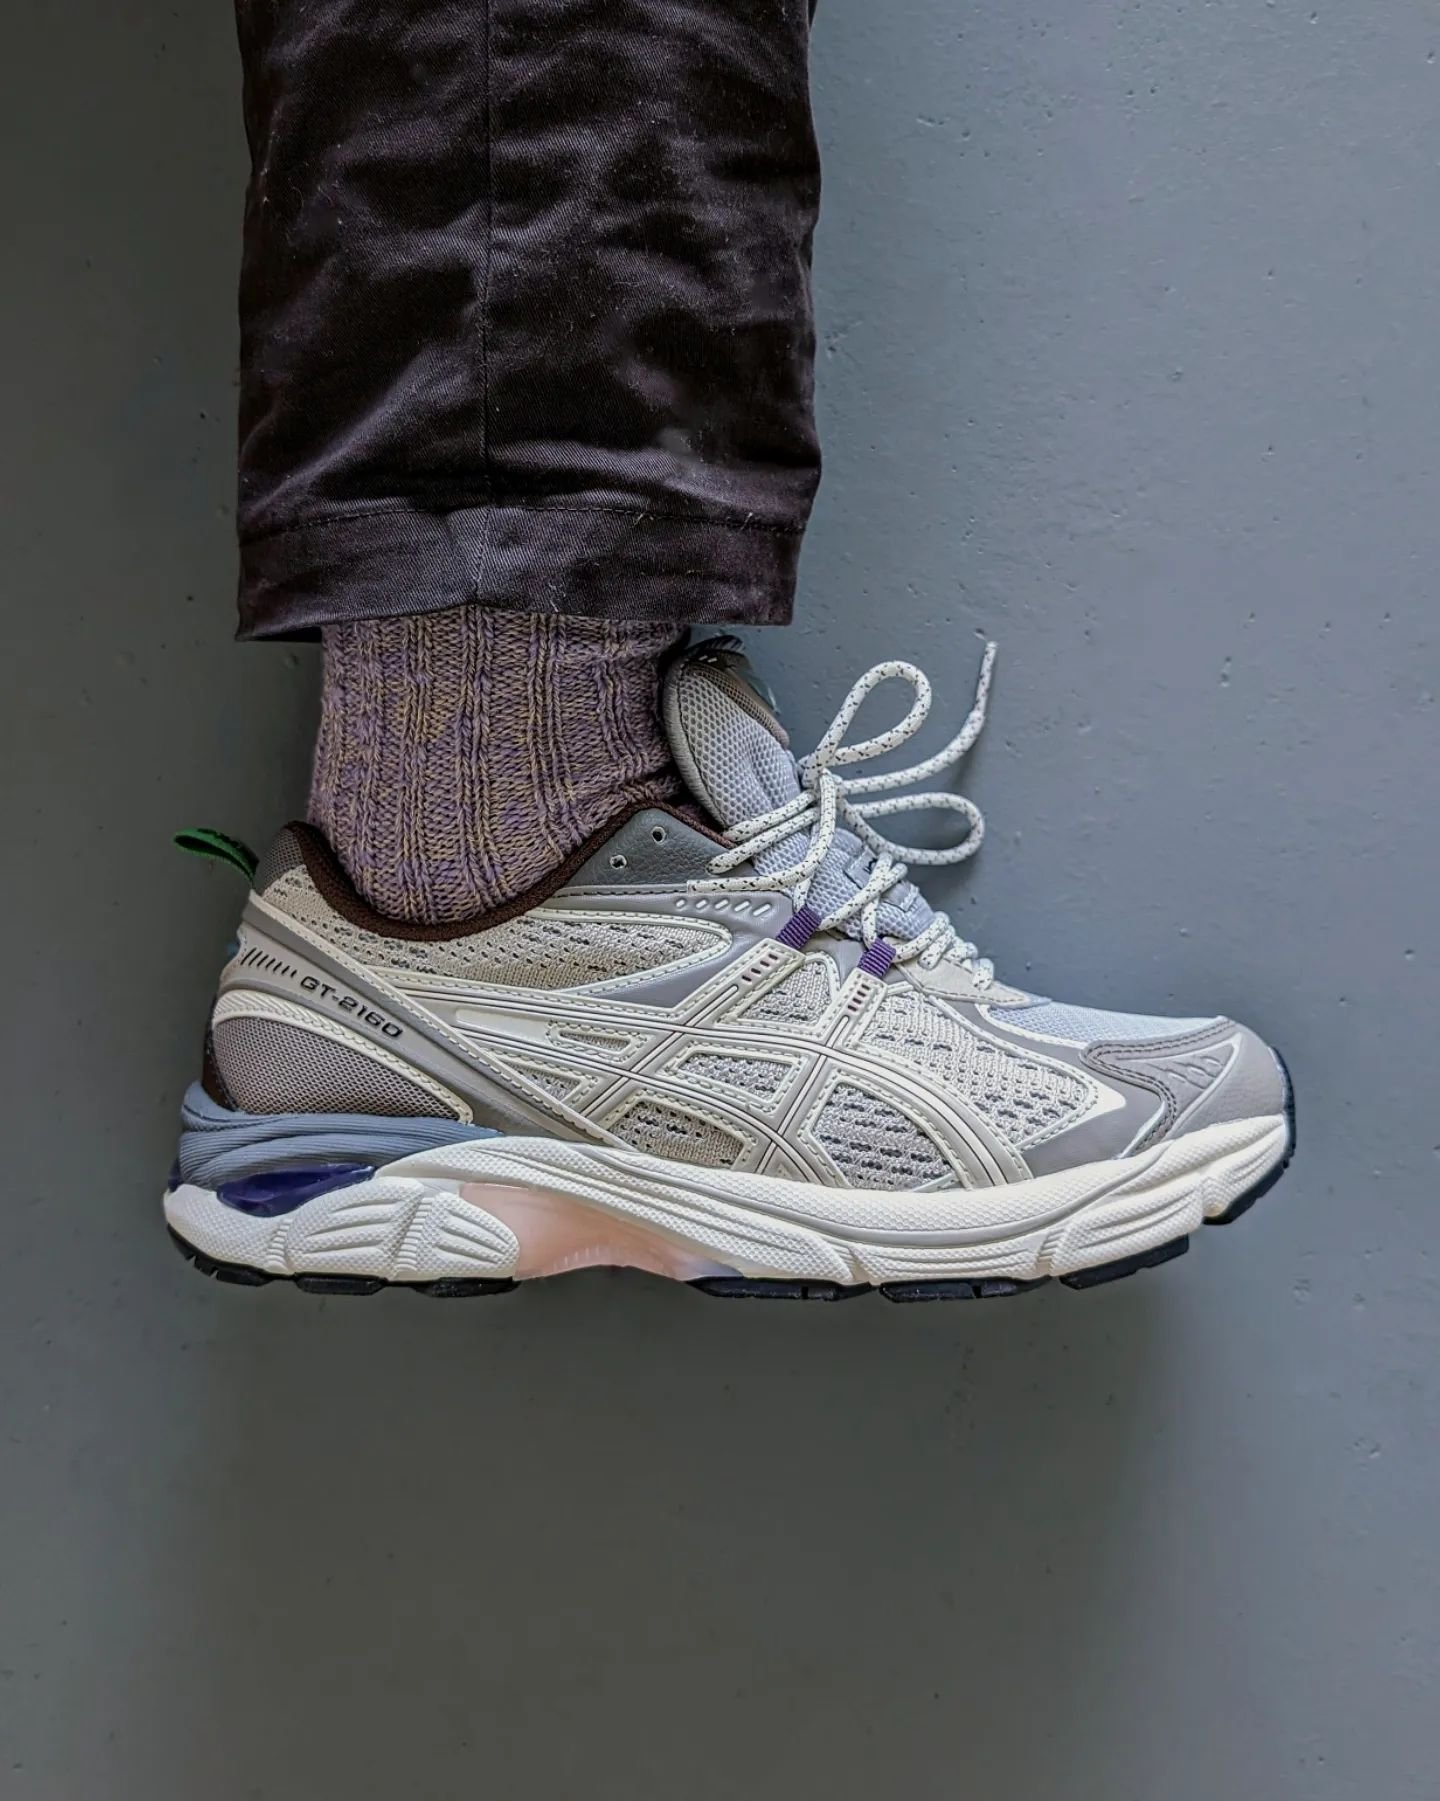 The latest review from @riblets1218 features the @w00dw00d x @asics_sportstyle GT-2160. Head over to our website to check it out #epsilonmagazine